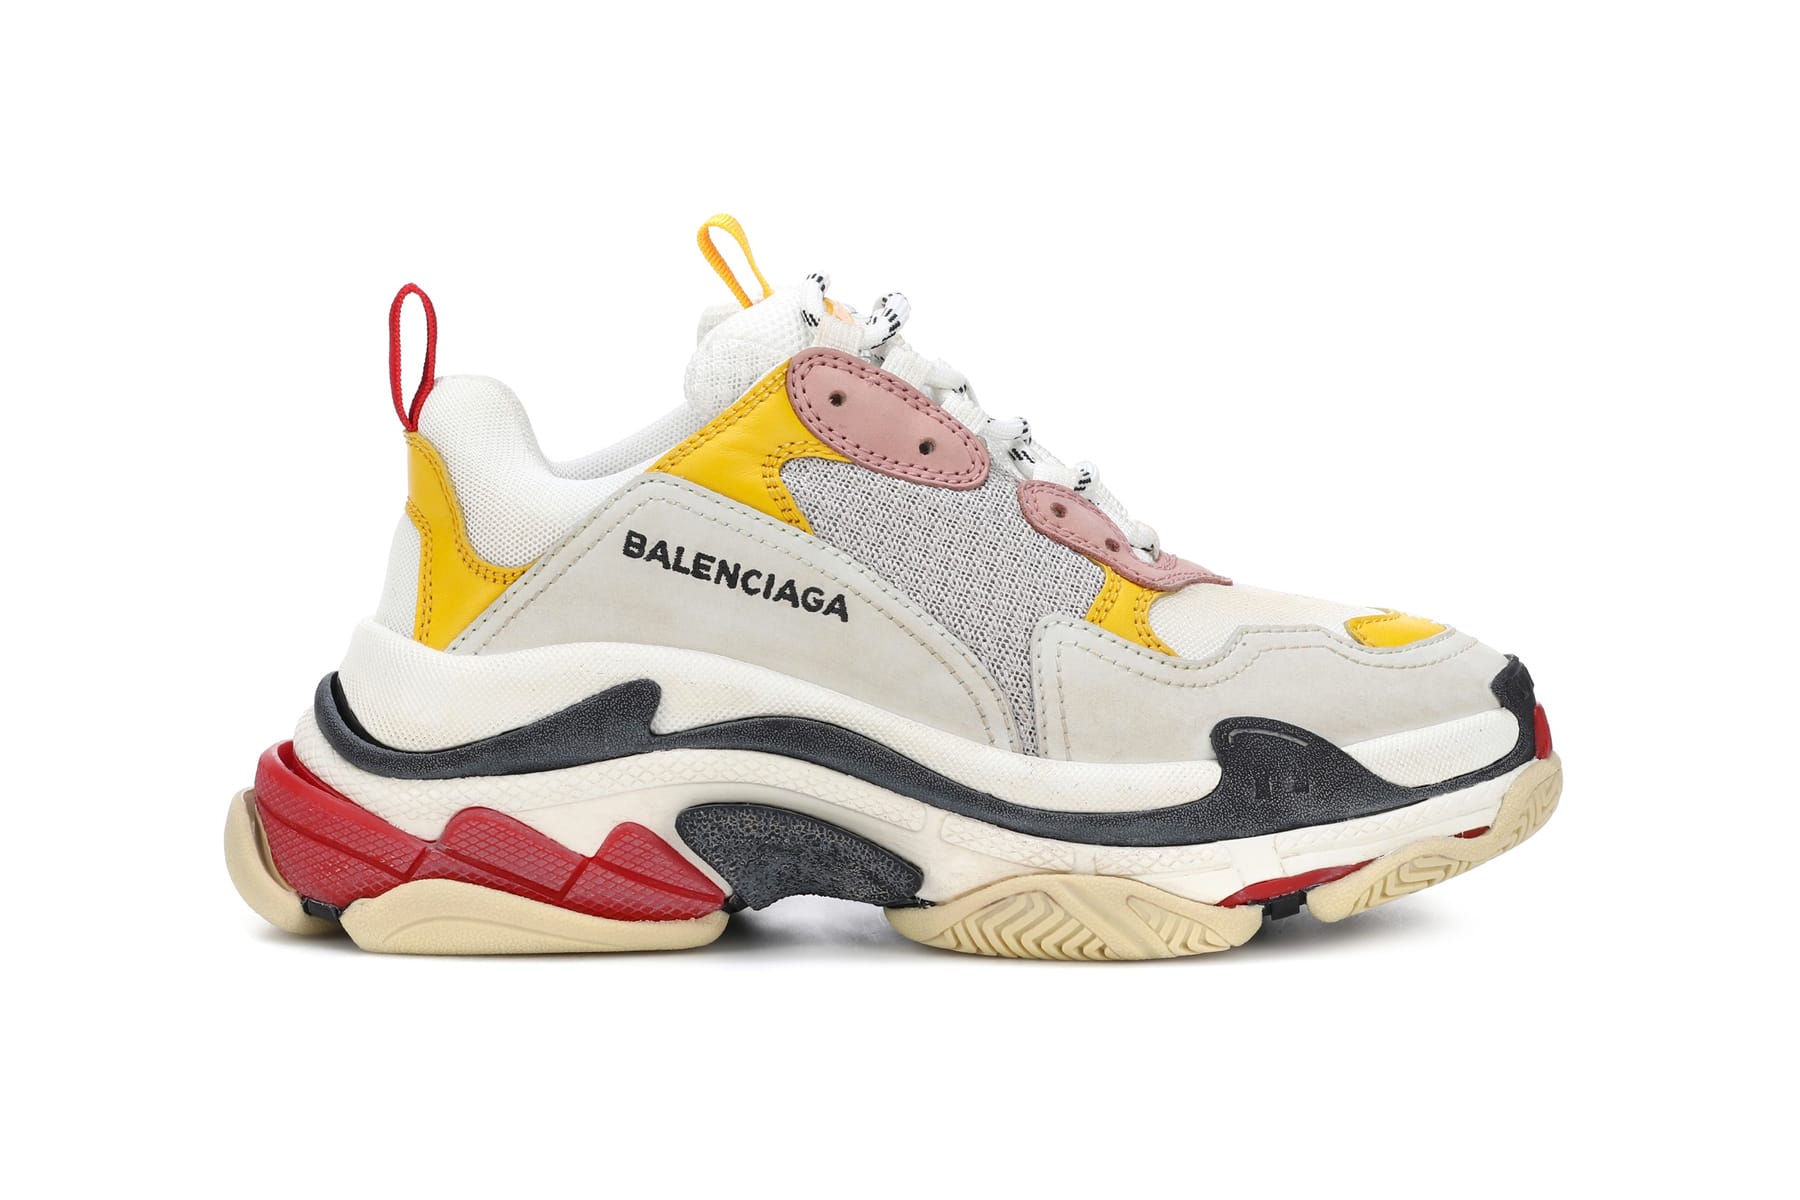 These Balenciaga Triple-S Shoes Have 